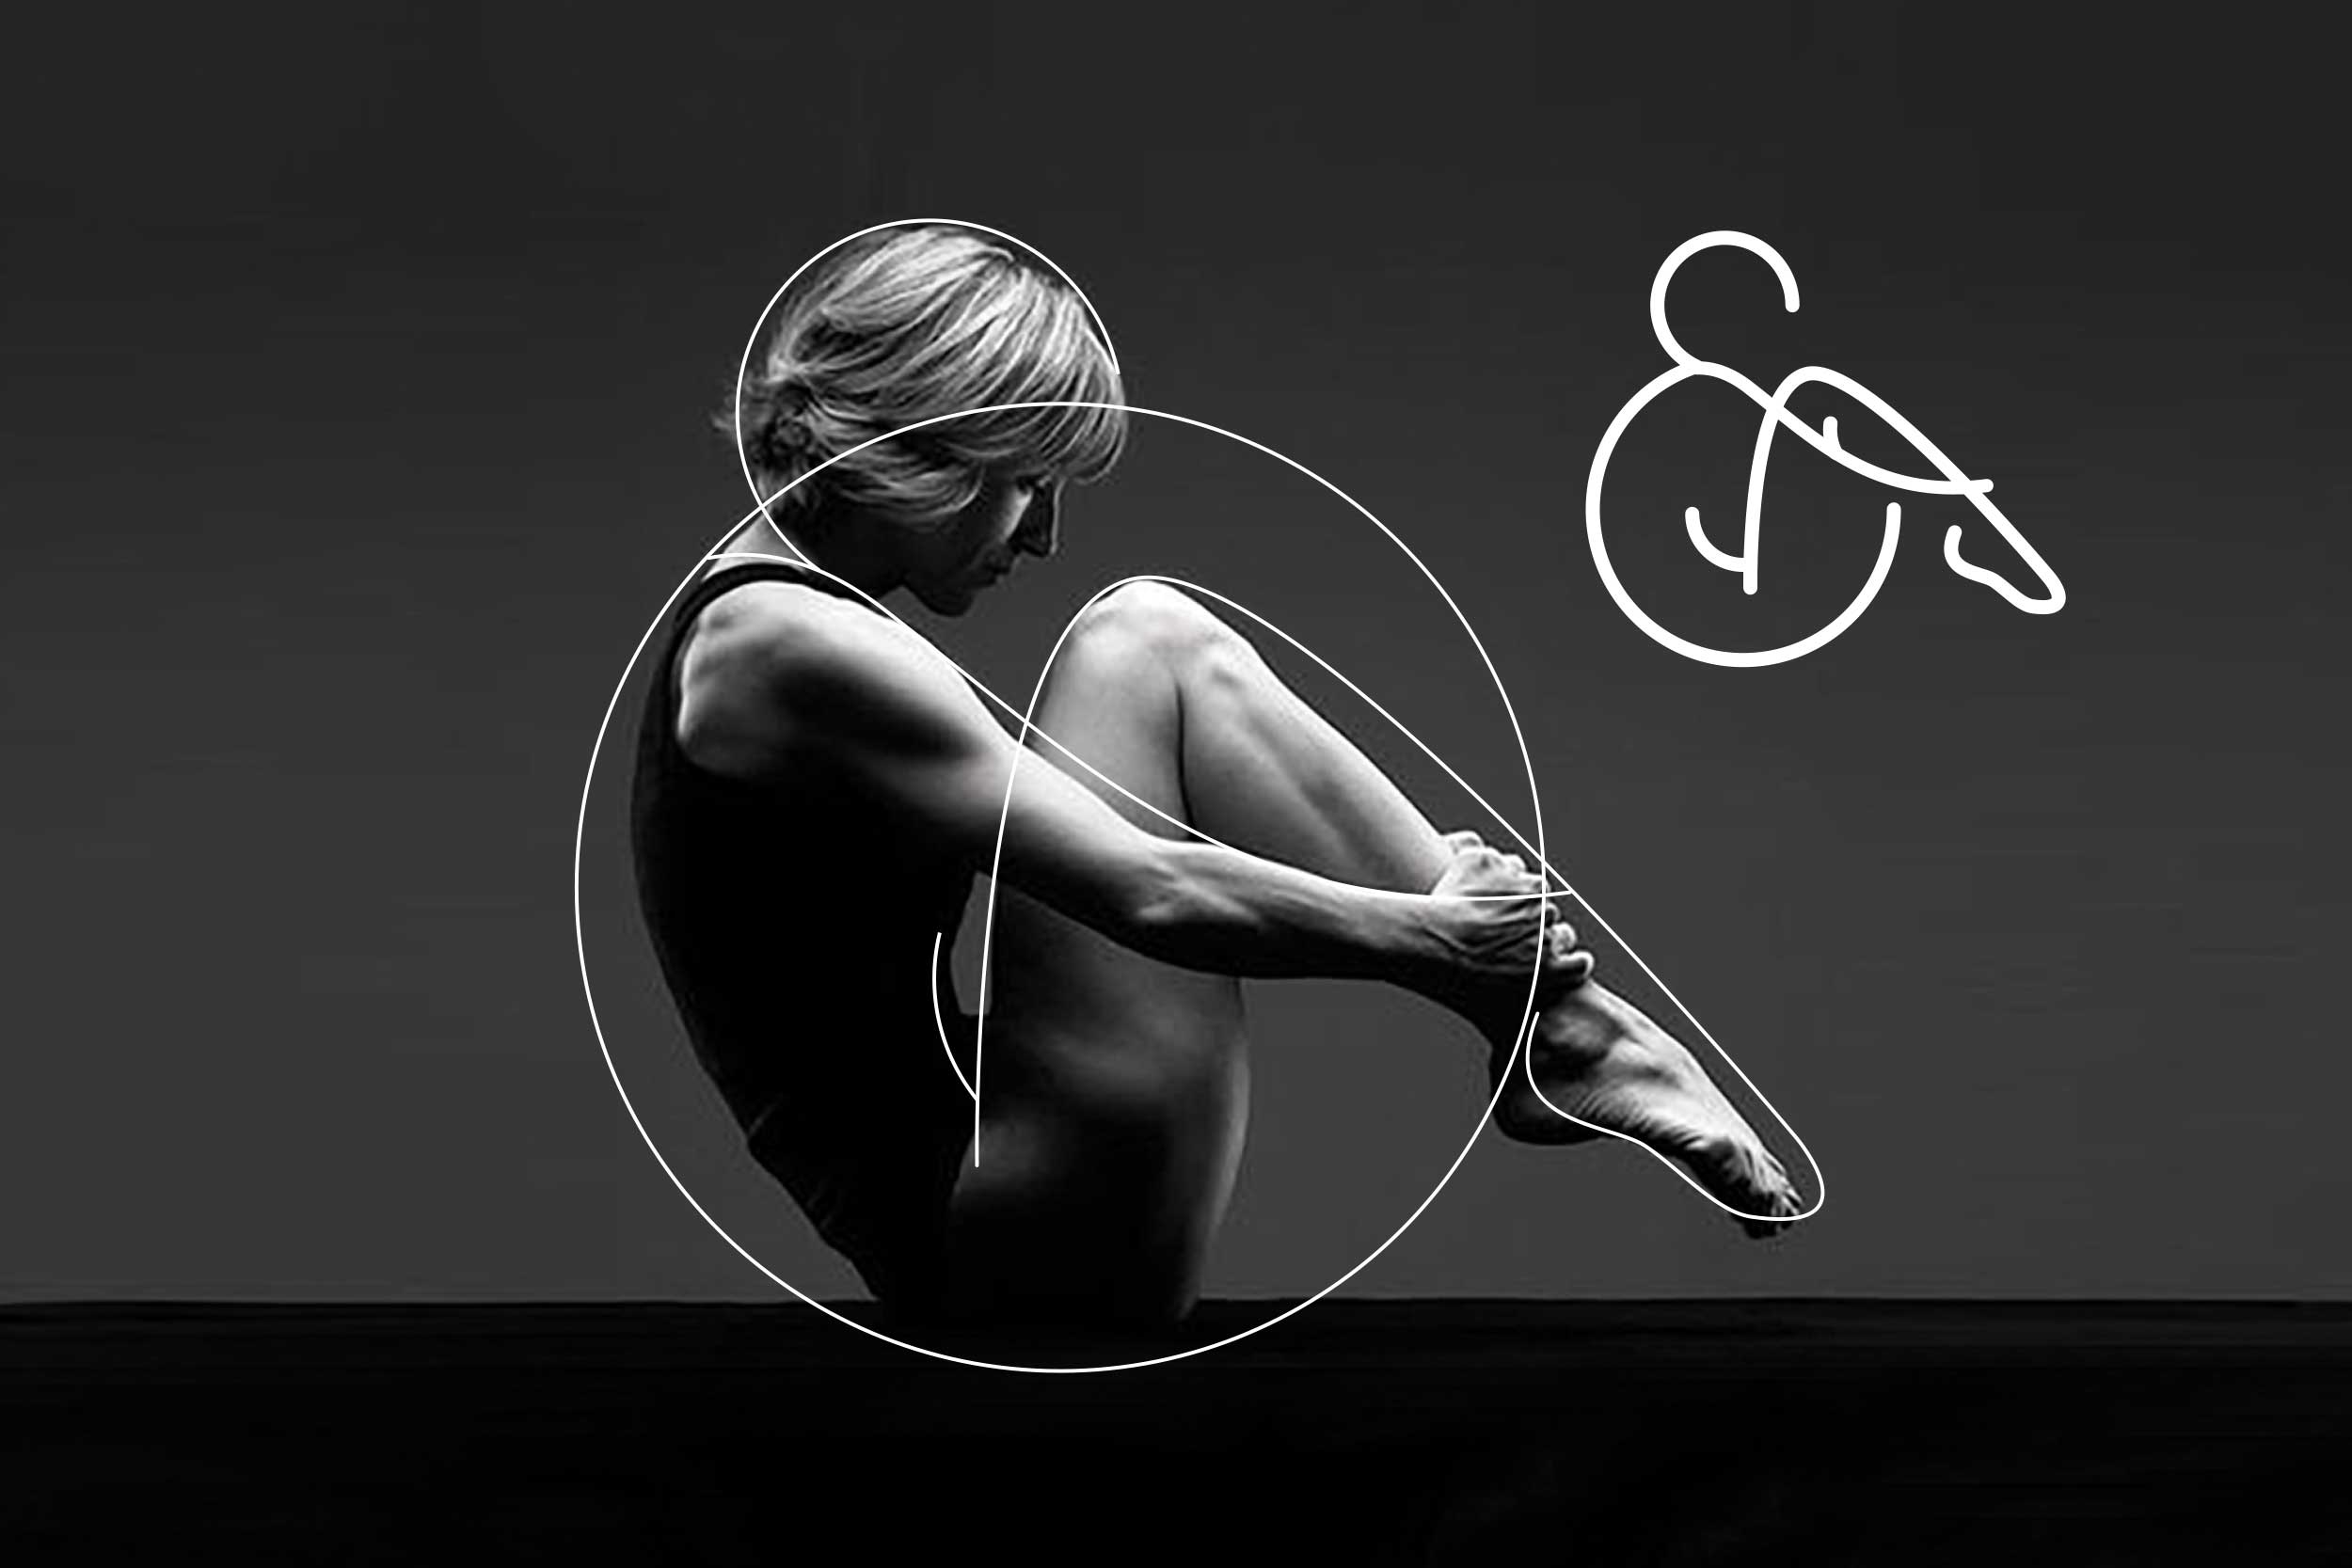 A graphic demonstrating how the logo was created and inspired from a classic Pilates pose.